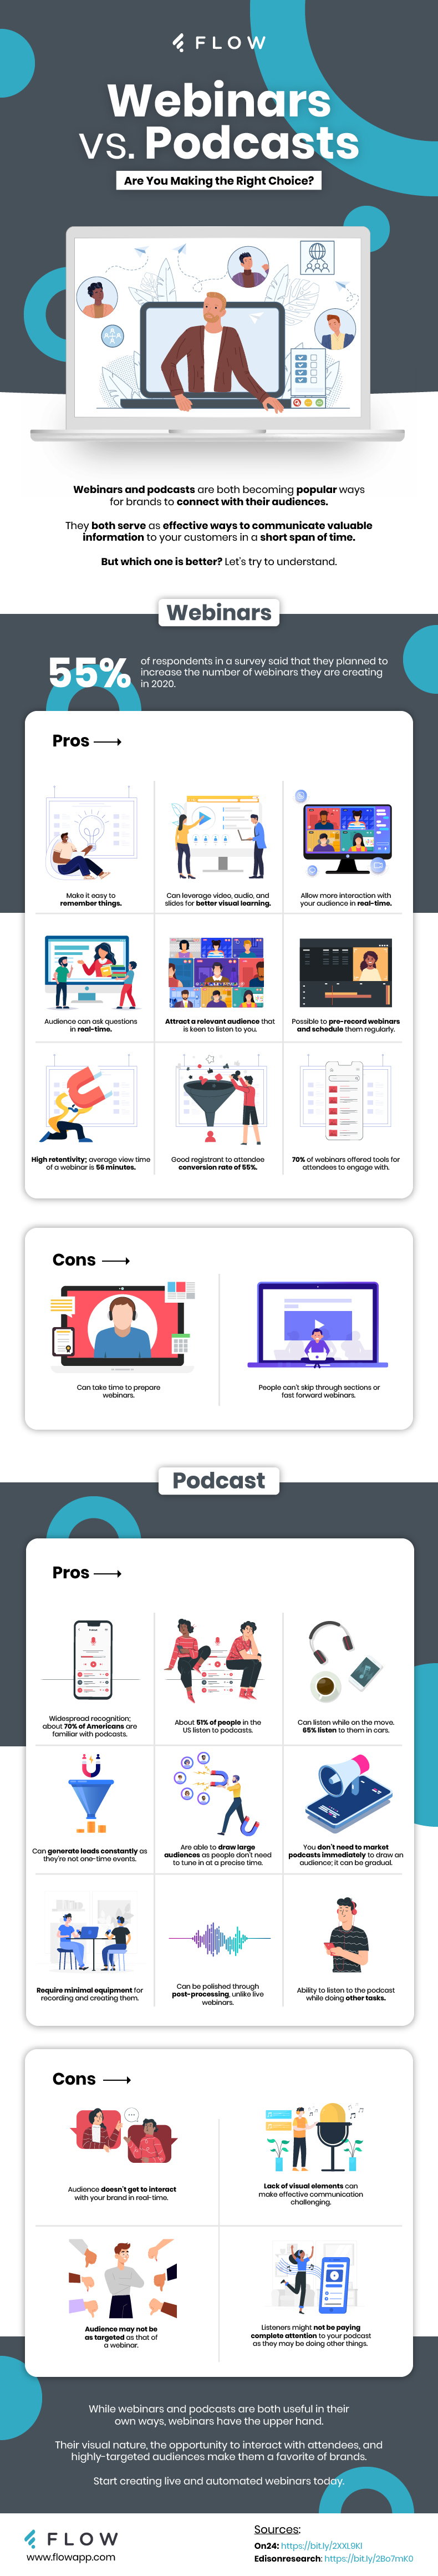 Webinars_vs-_Podcasts_Are_You_Making_the_Right_Choice-(1).jpg